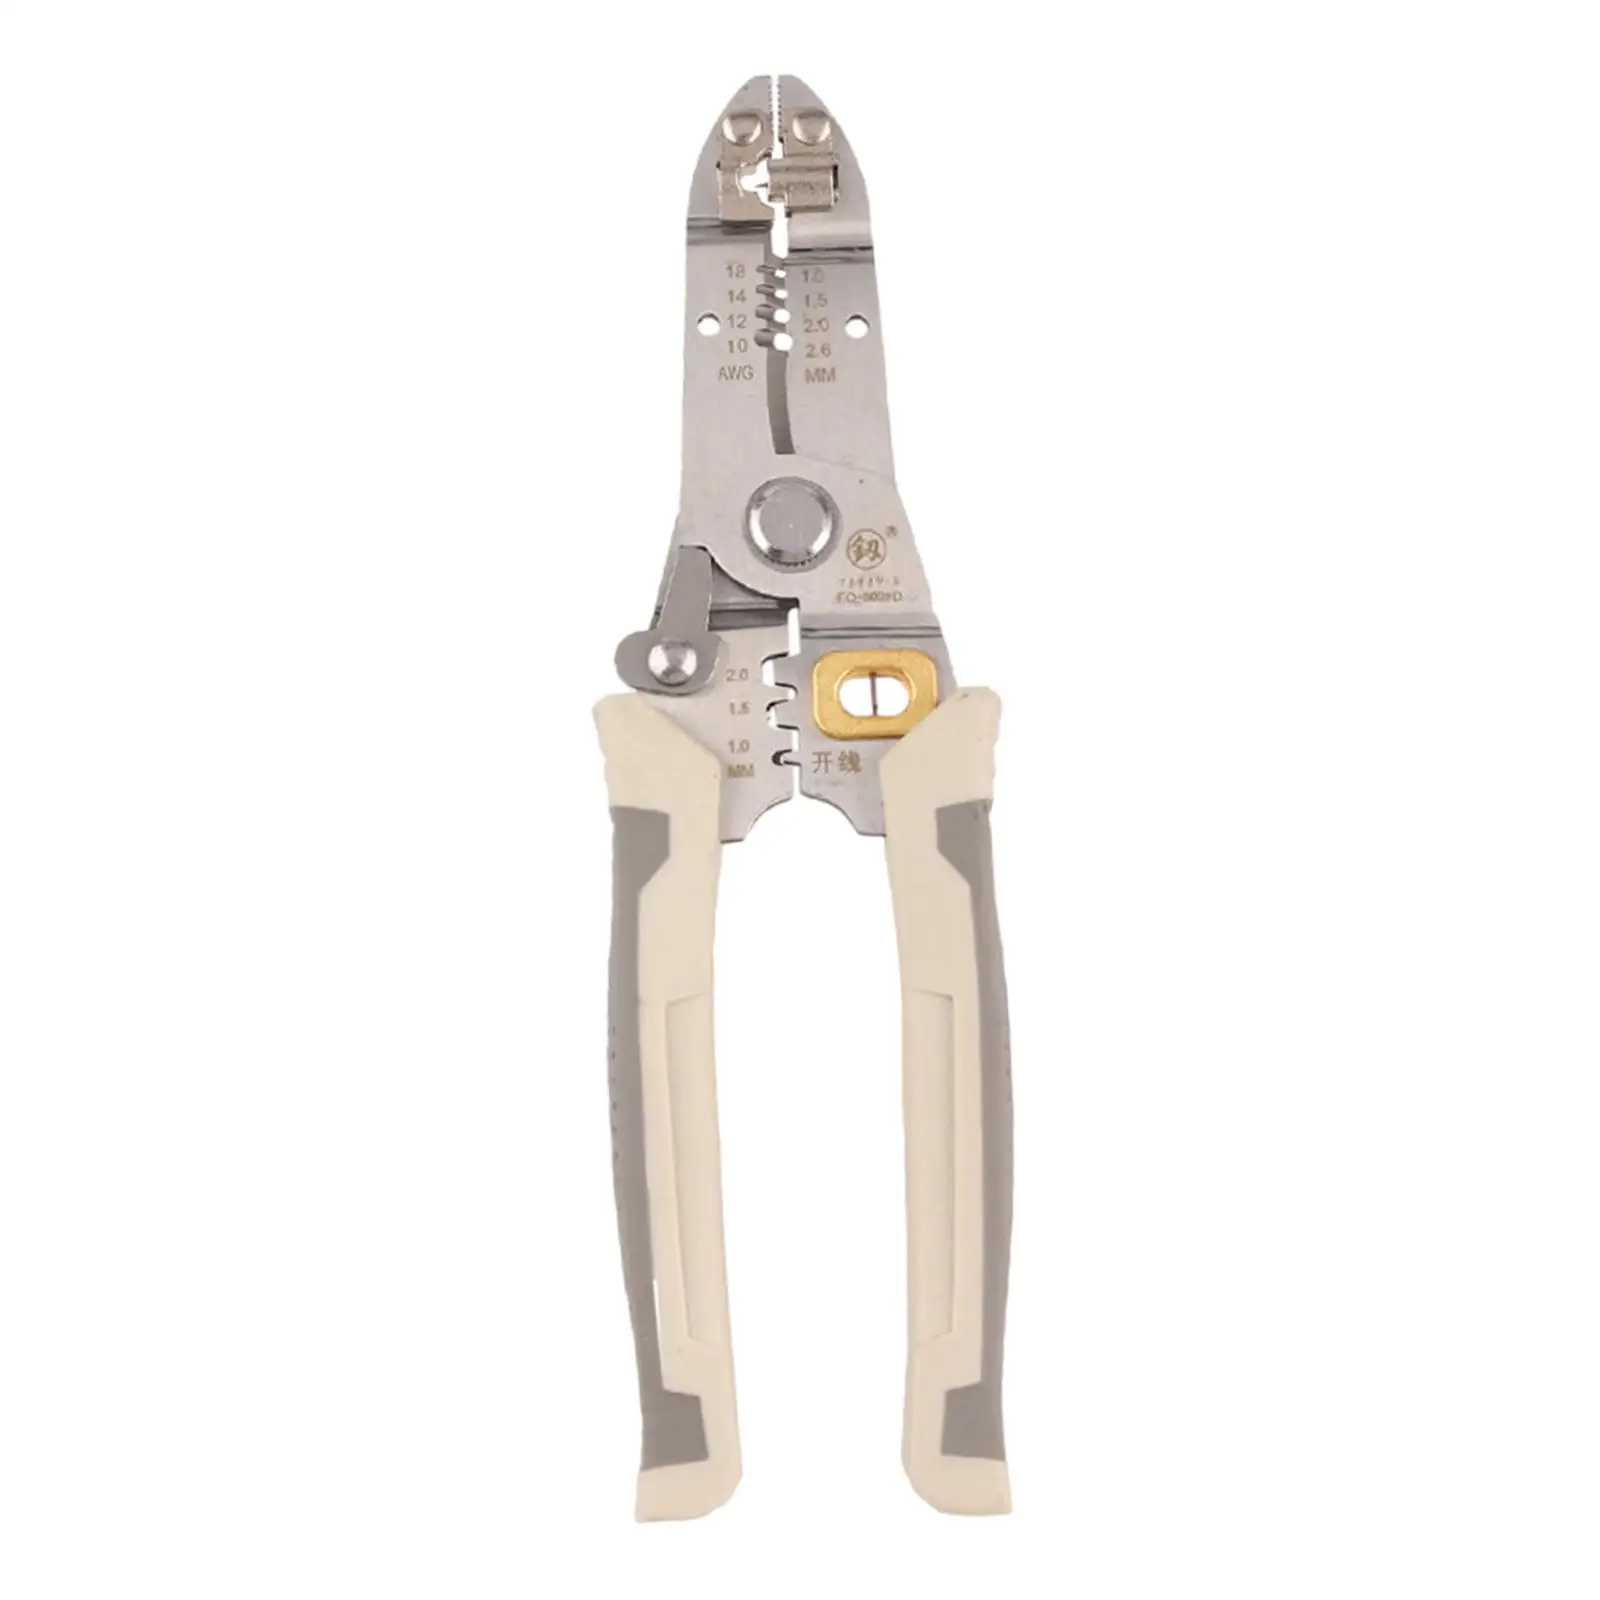 

Wire Stripper Pliers, Wire Cutter Stripper, Multipurpose Electricians Wire Pliers Tool, Crimper Tool for Crimping Pulling